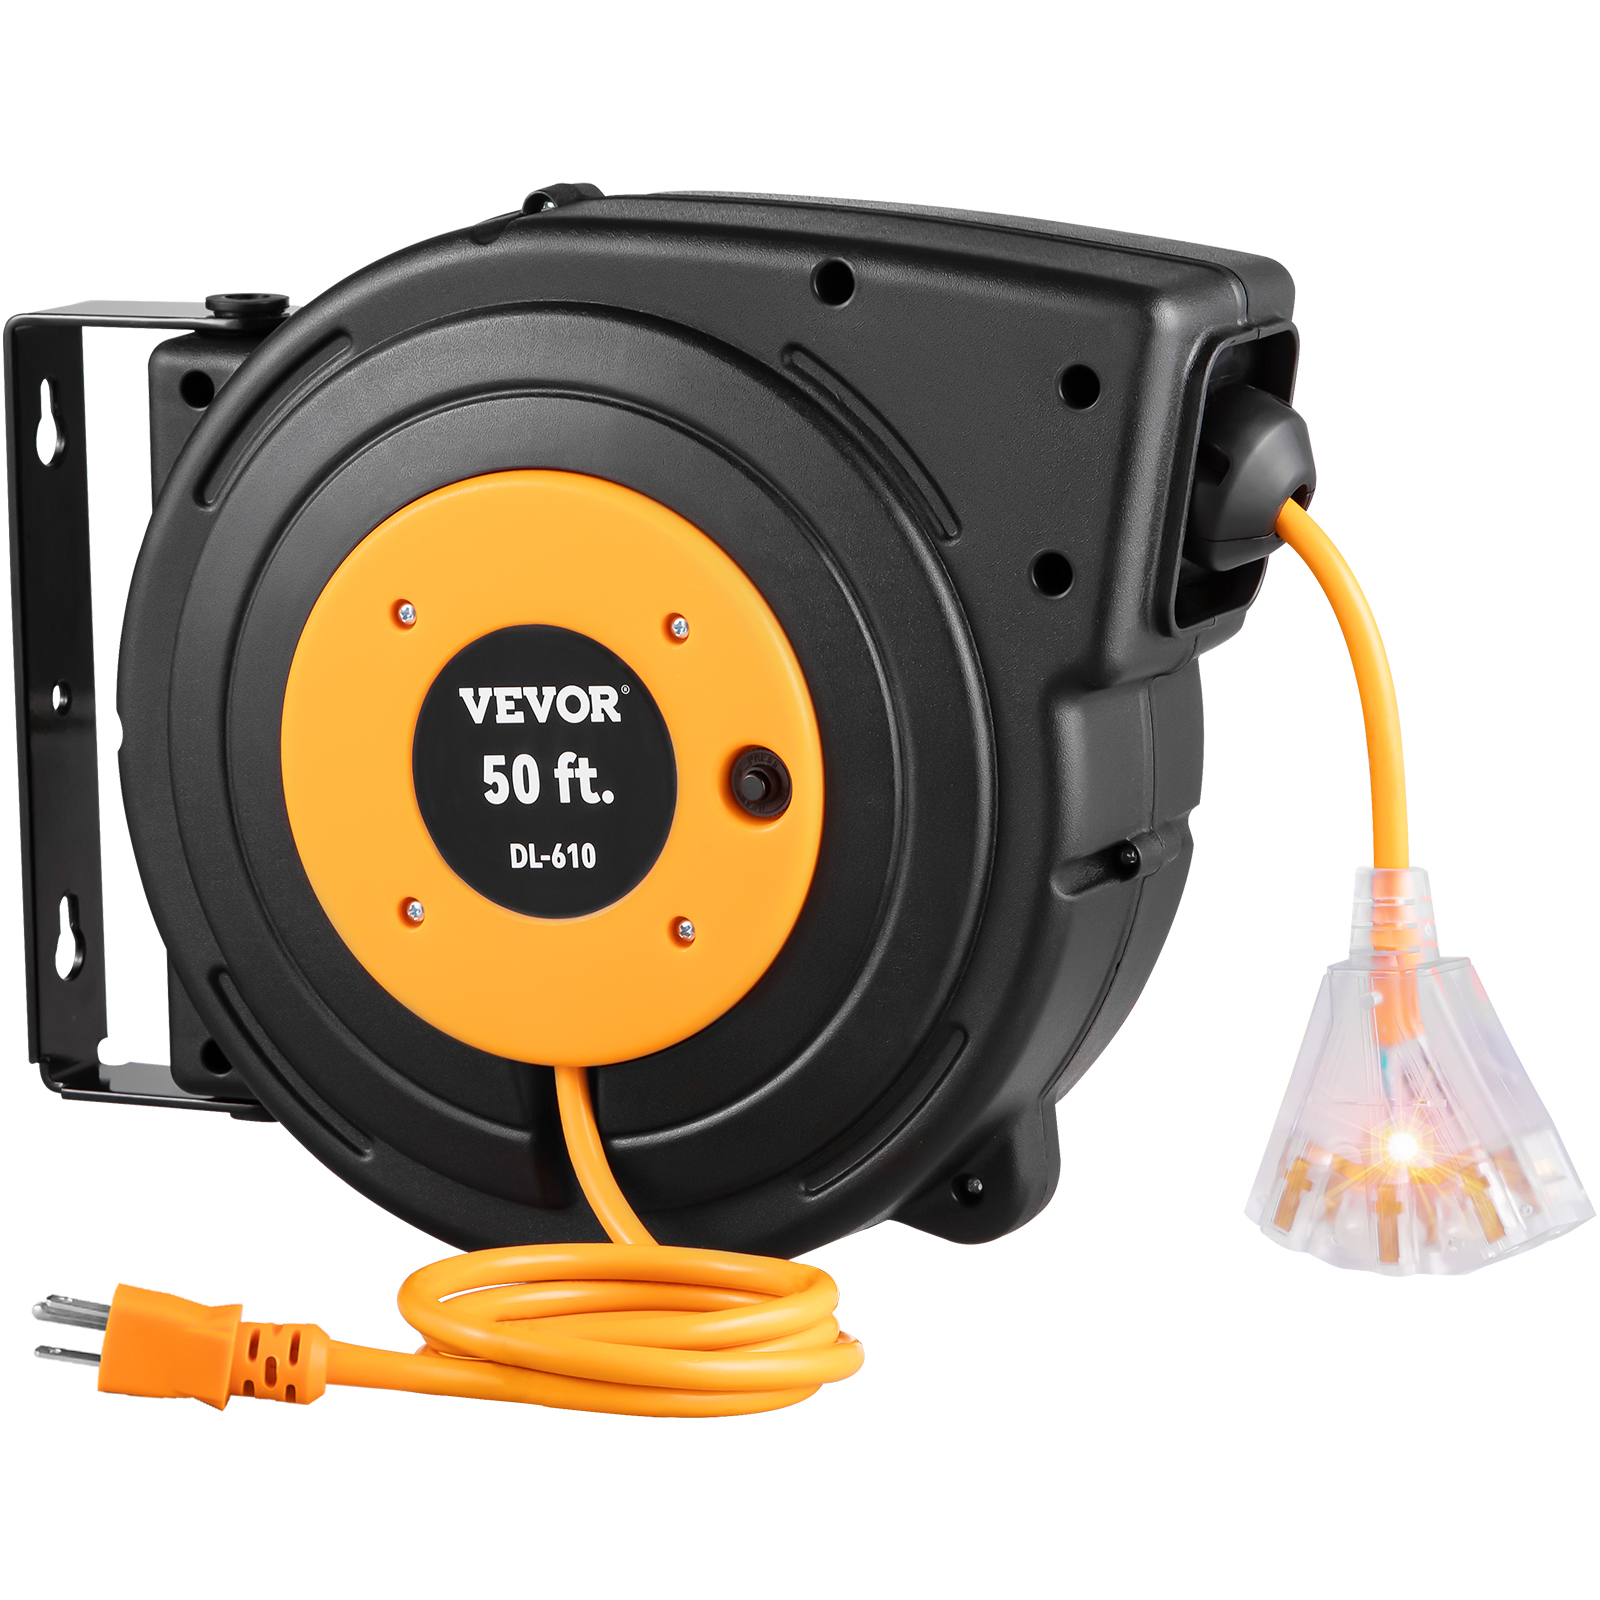 https://d2qc09rl1gfuof.cloudfront.net/product/SS501650W110VPG8H/retractable-cord-reel-m100-1.2.jpg